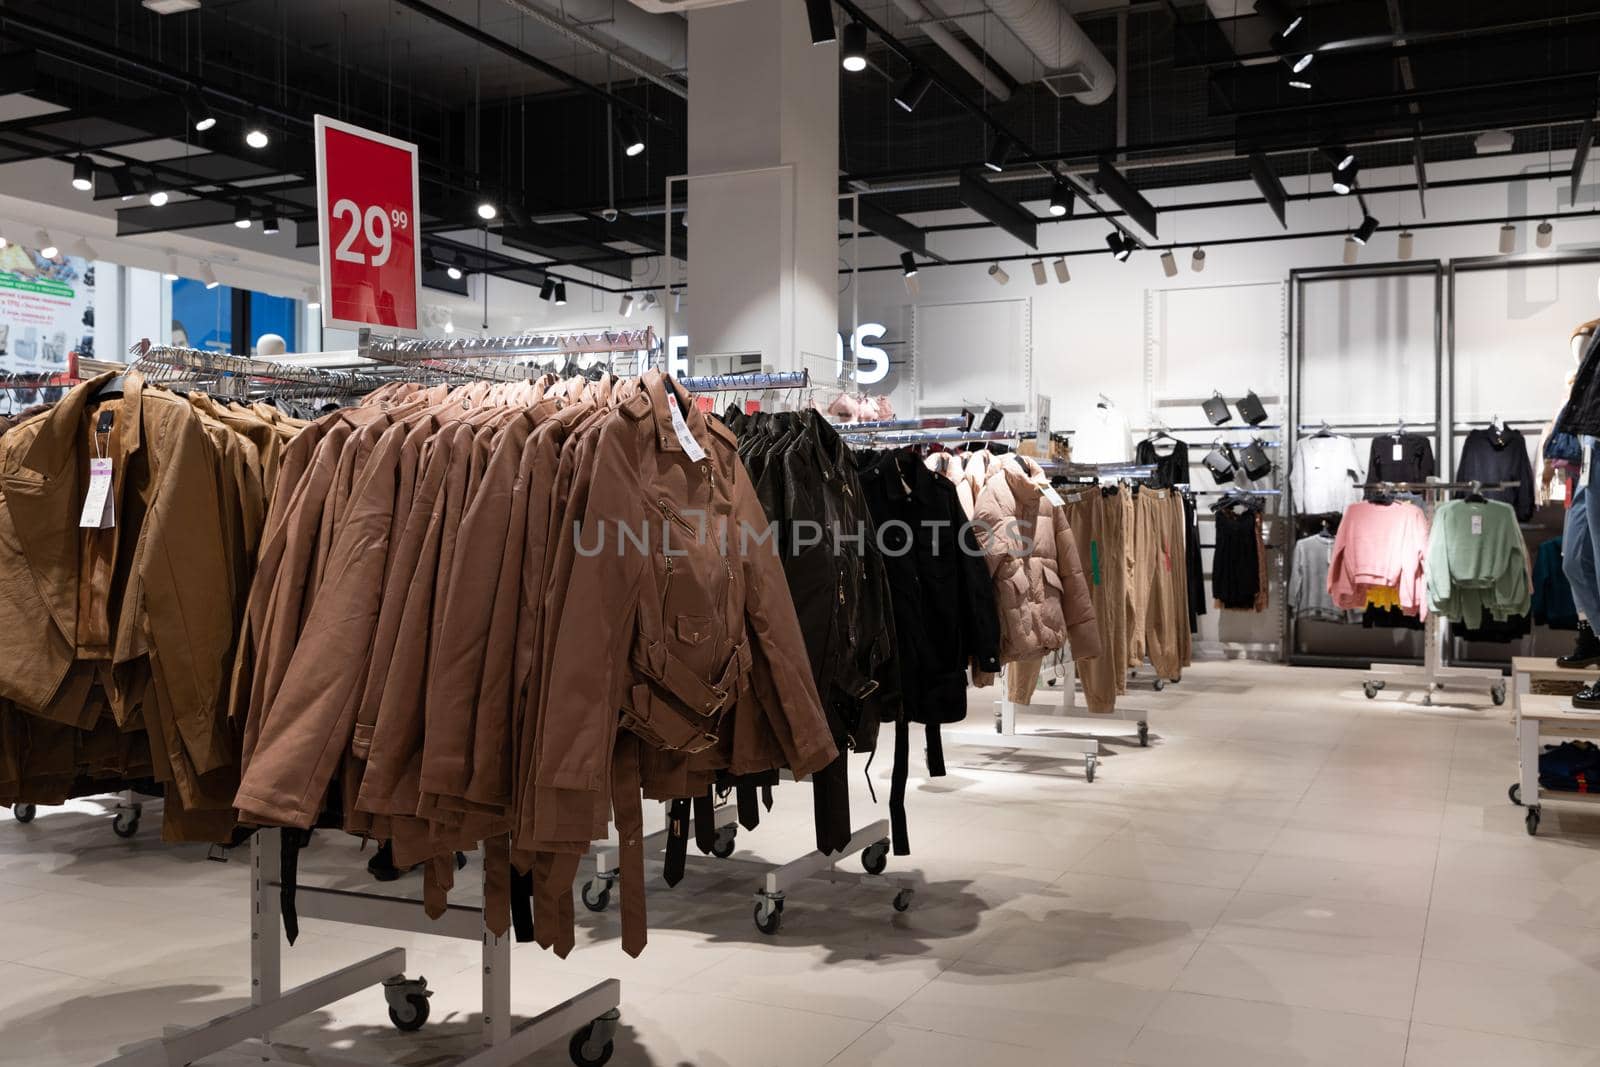 interior of a store selling stylish inexpensive clothes, jackets on hangers in a wide range.